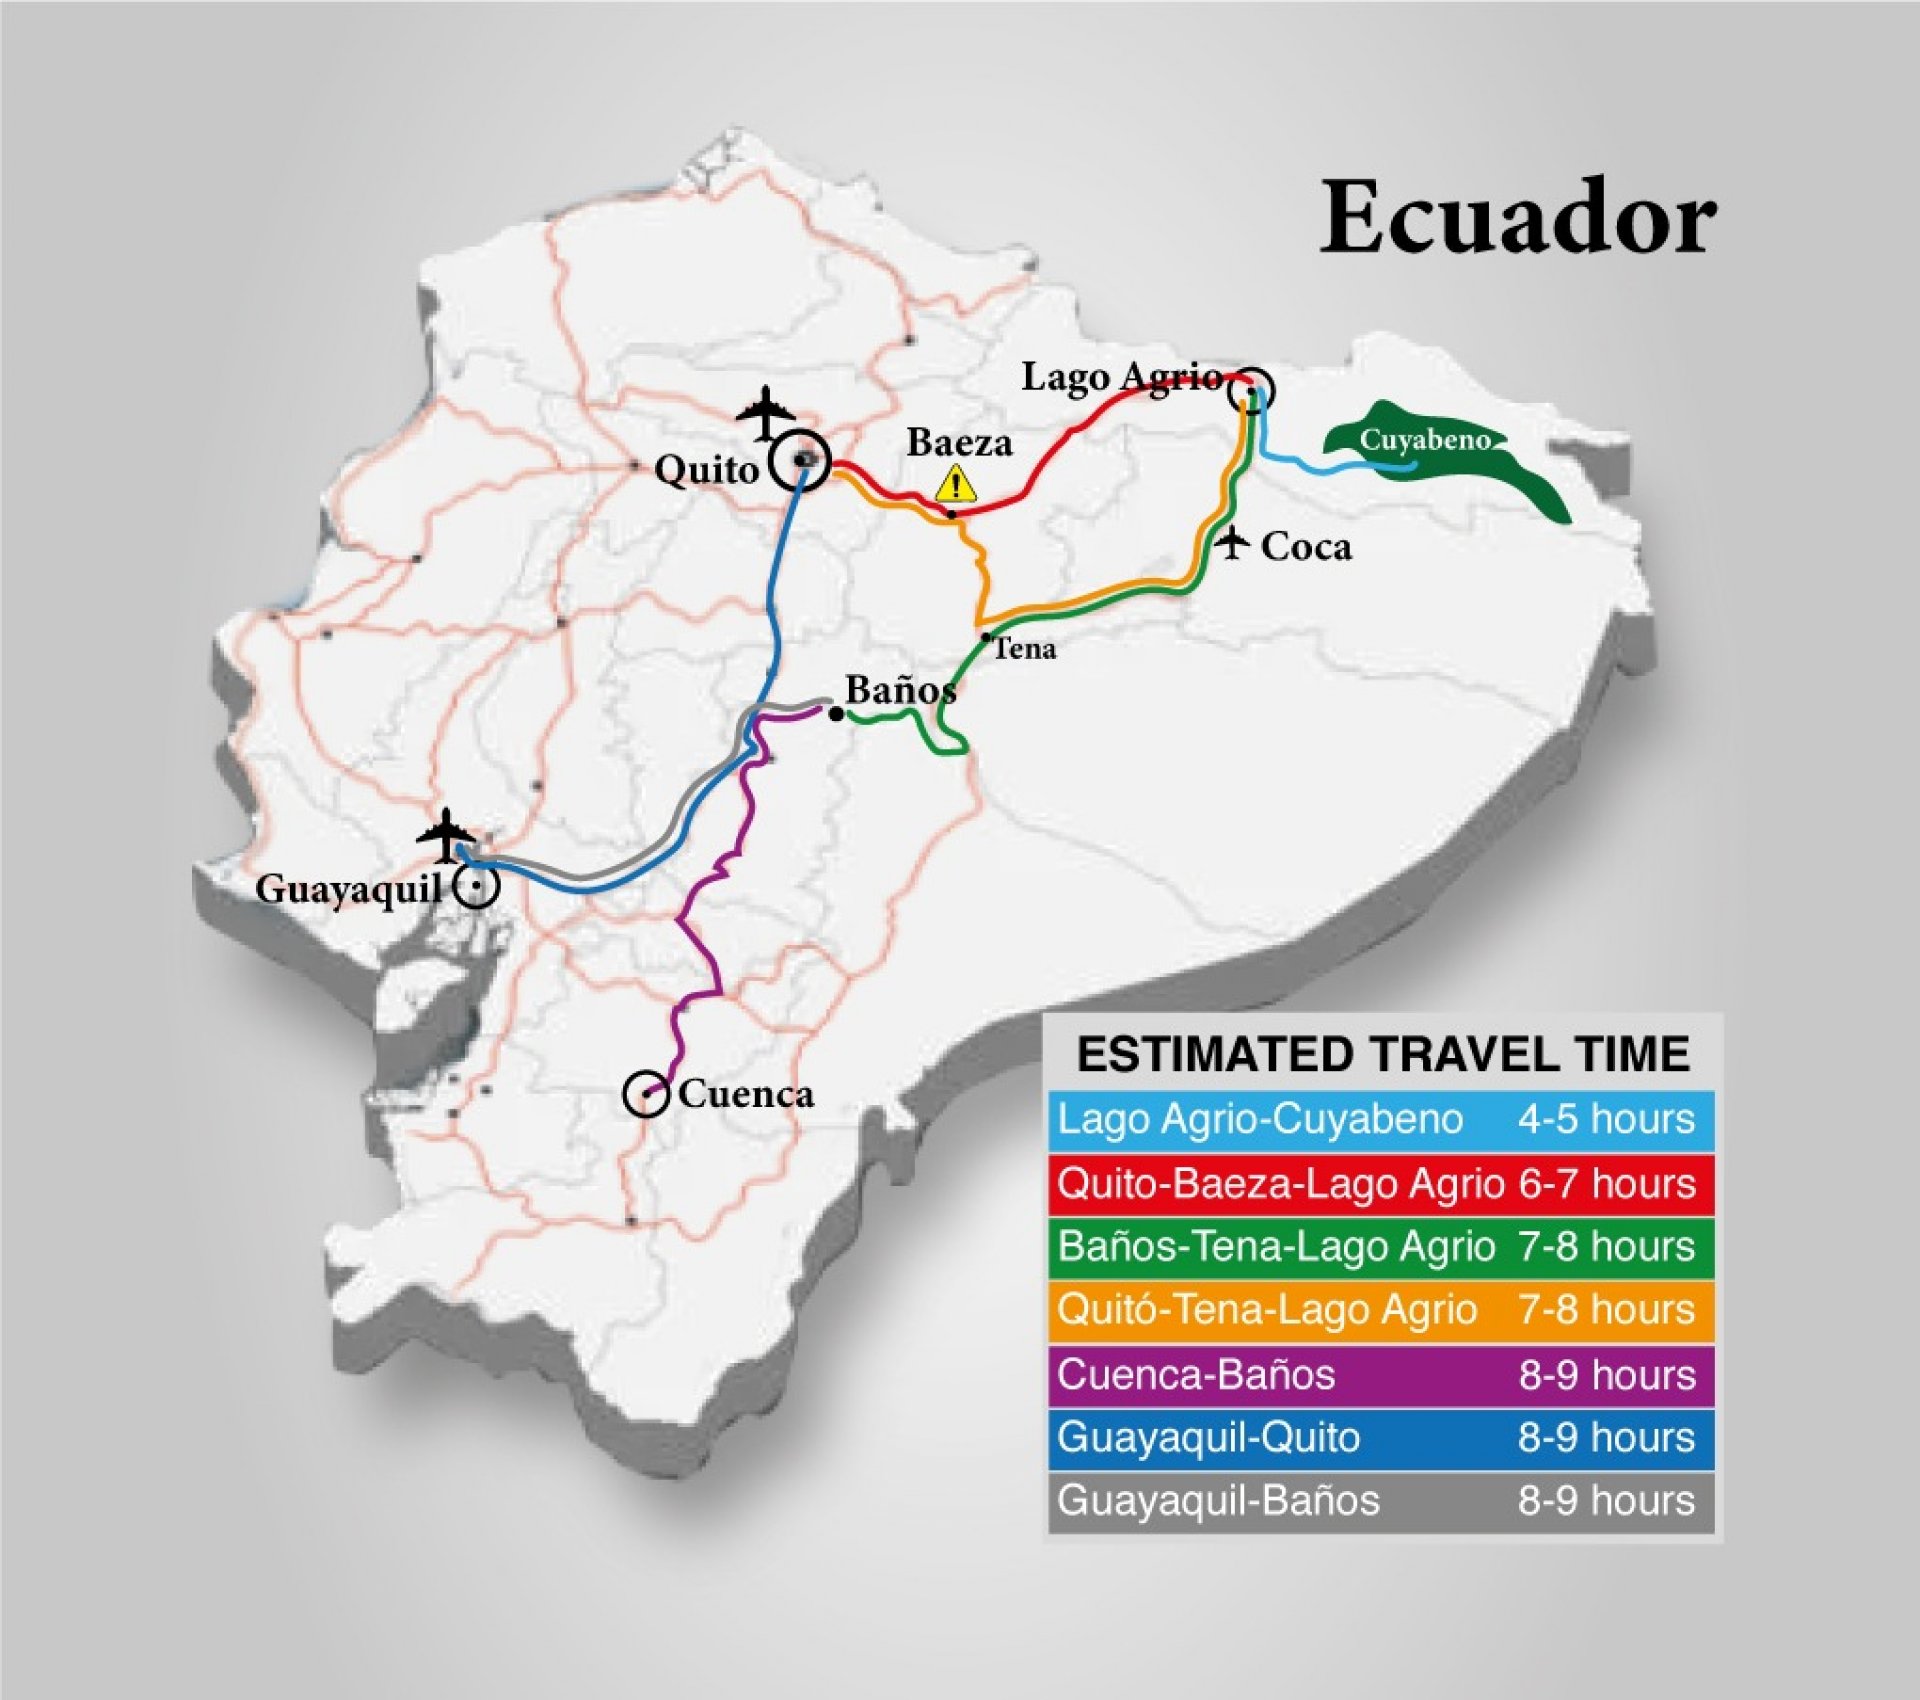 How to get to Lago Agrio from Quito by Bus?